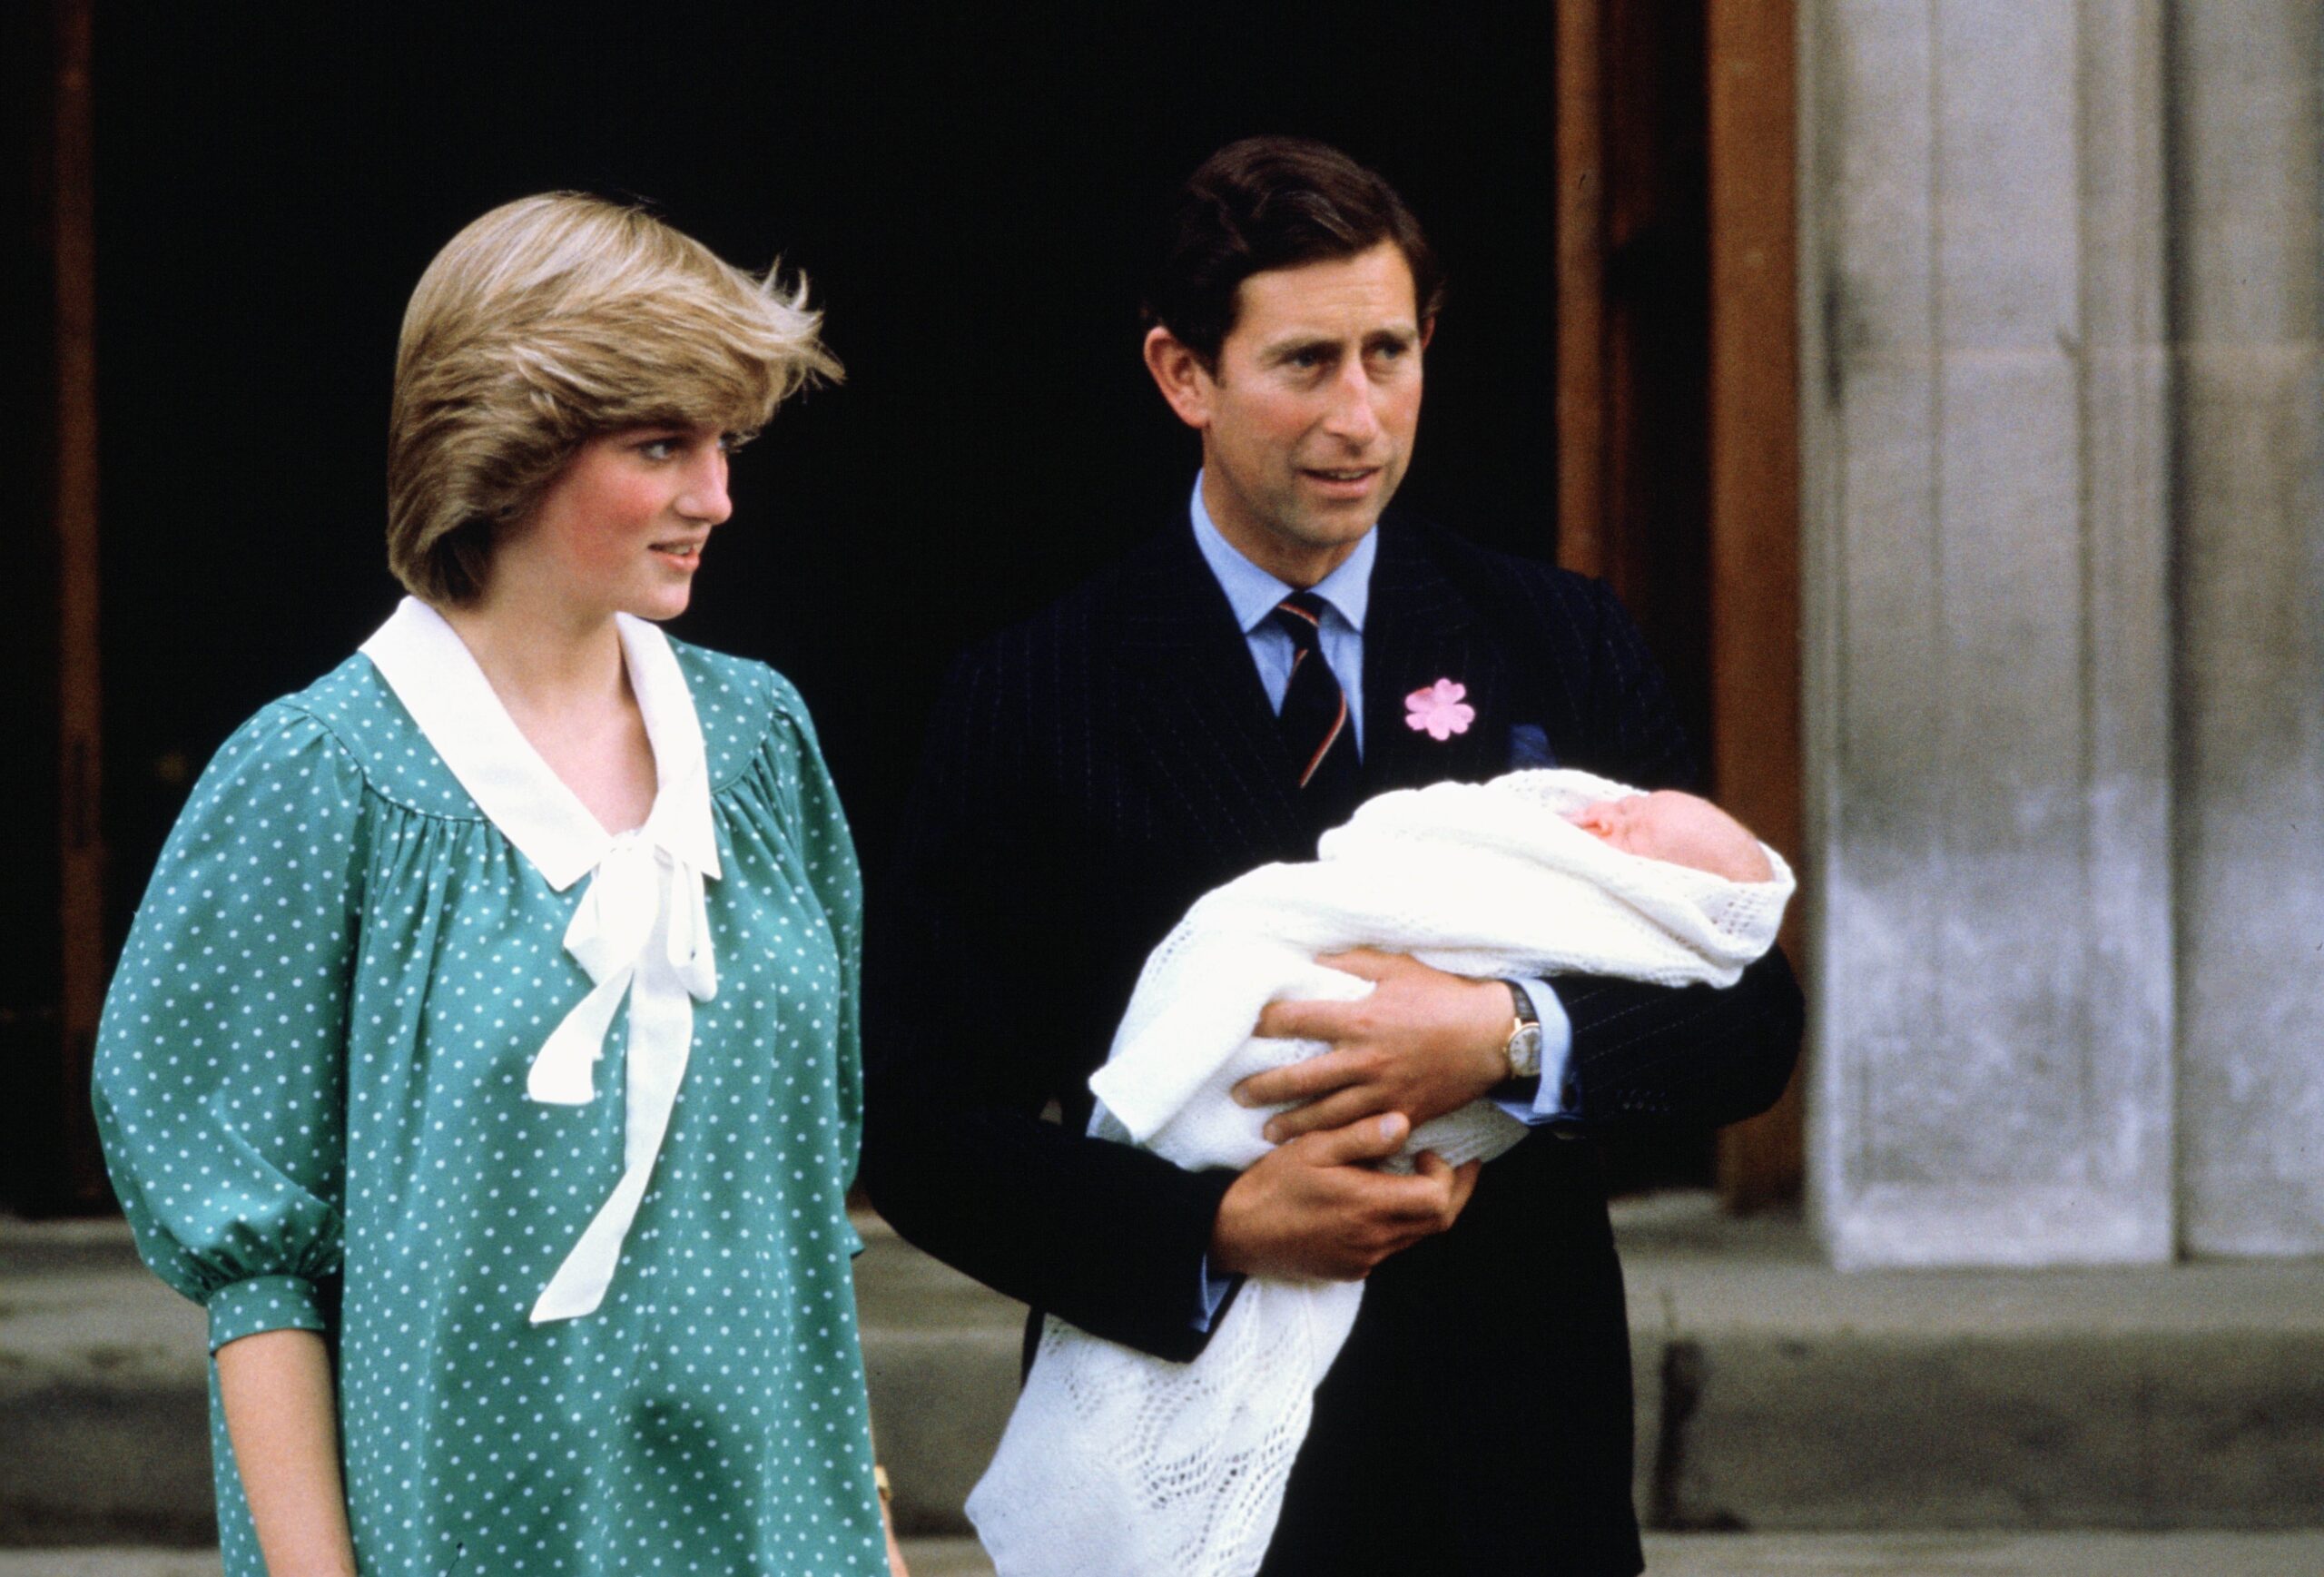 Prince Charles, Prince of Wales and Diana, Princess of Wales leave St Mary's Hospital in Paddington with their baby son, Prince William. | Source: Getty Images